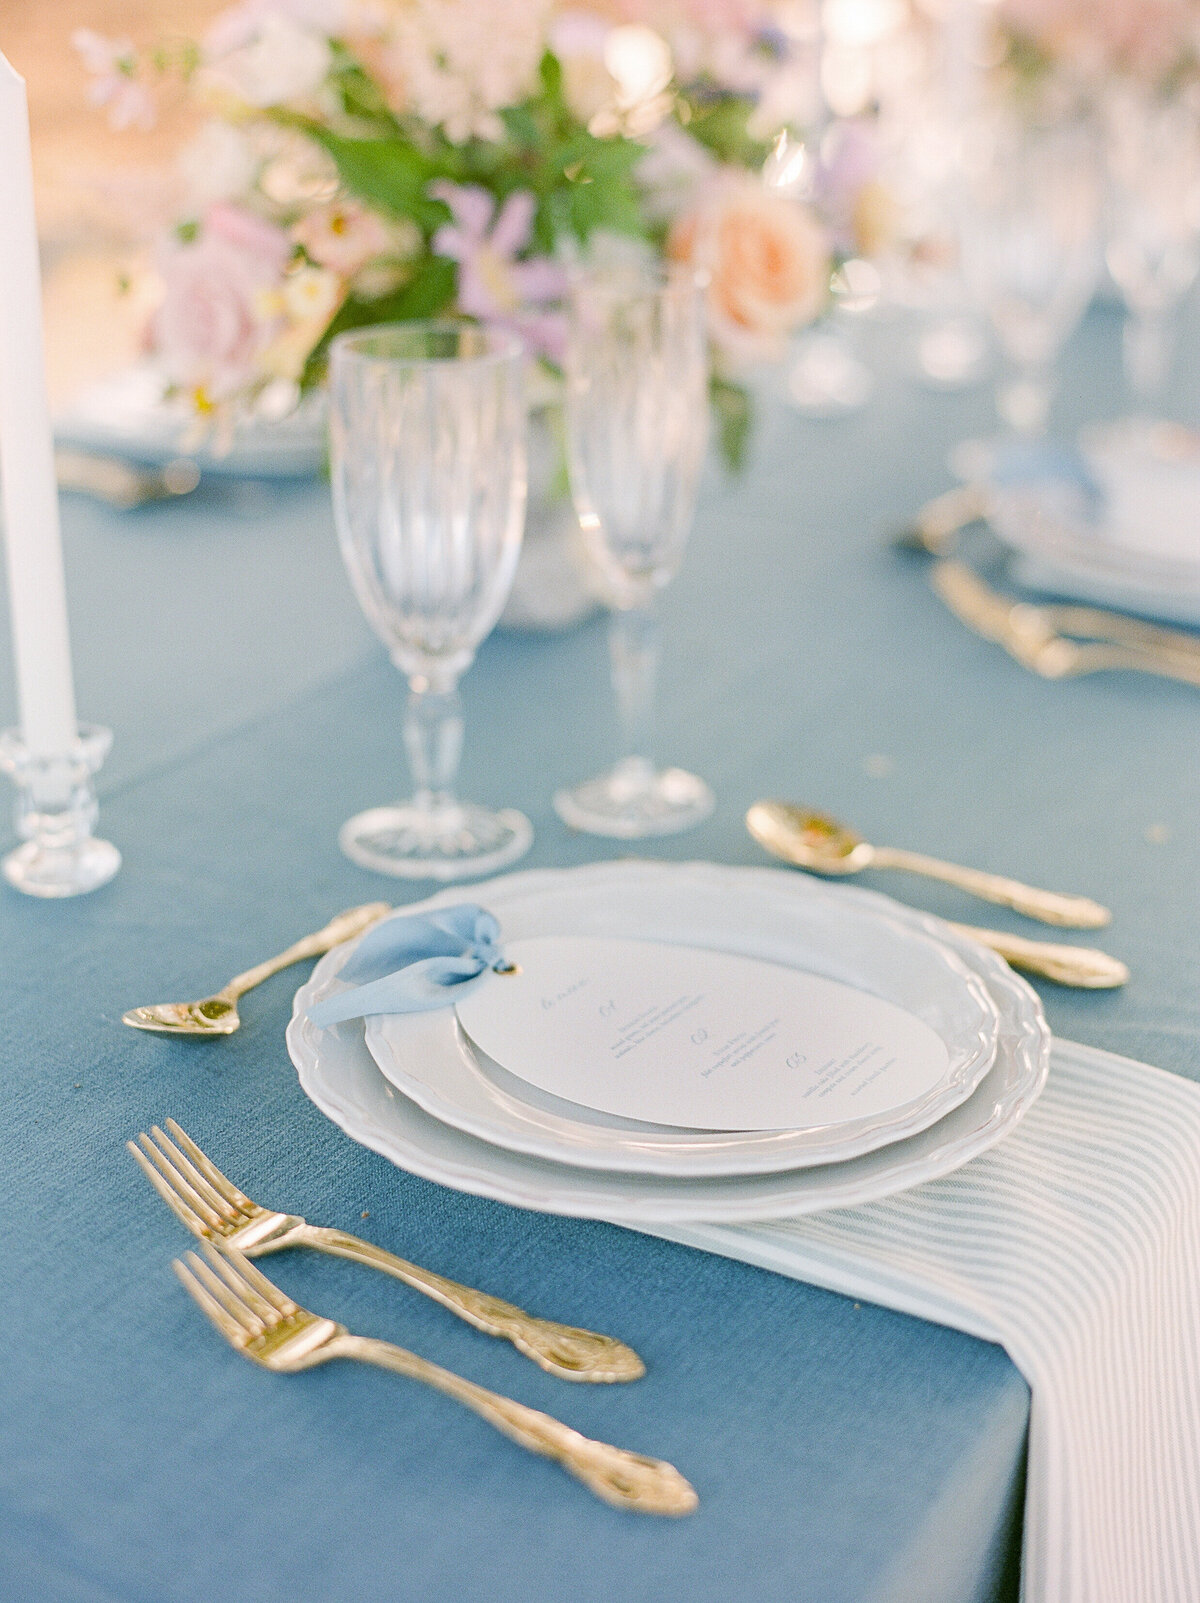 table plates with golden silverware on a table with a blue tablecloth and pastel florals in the background